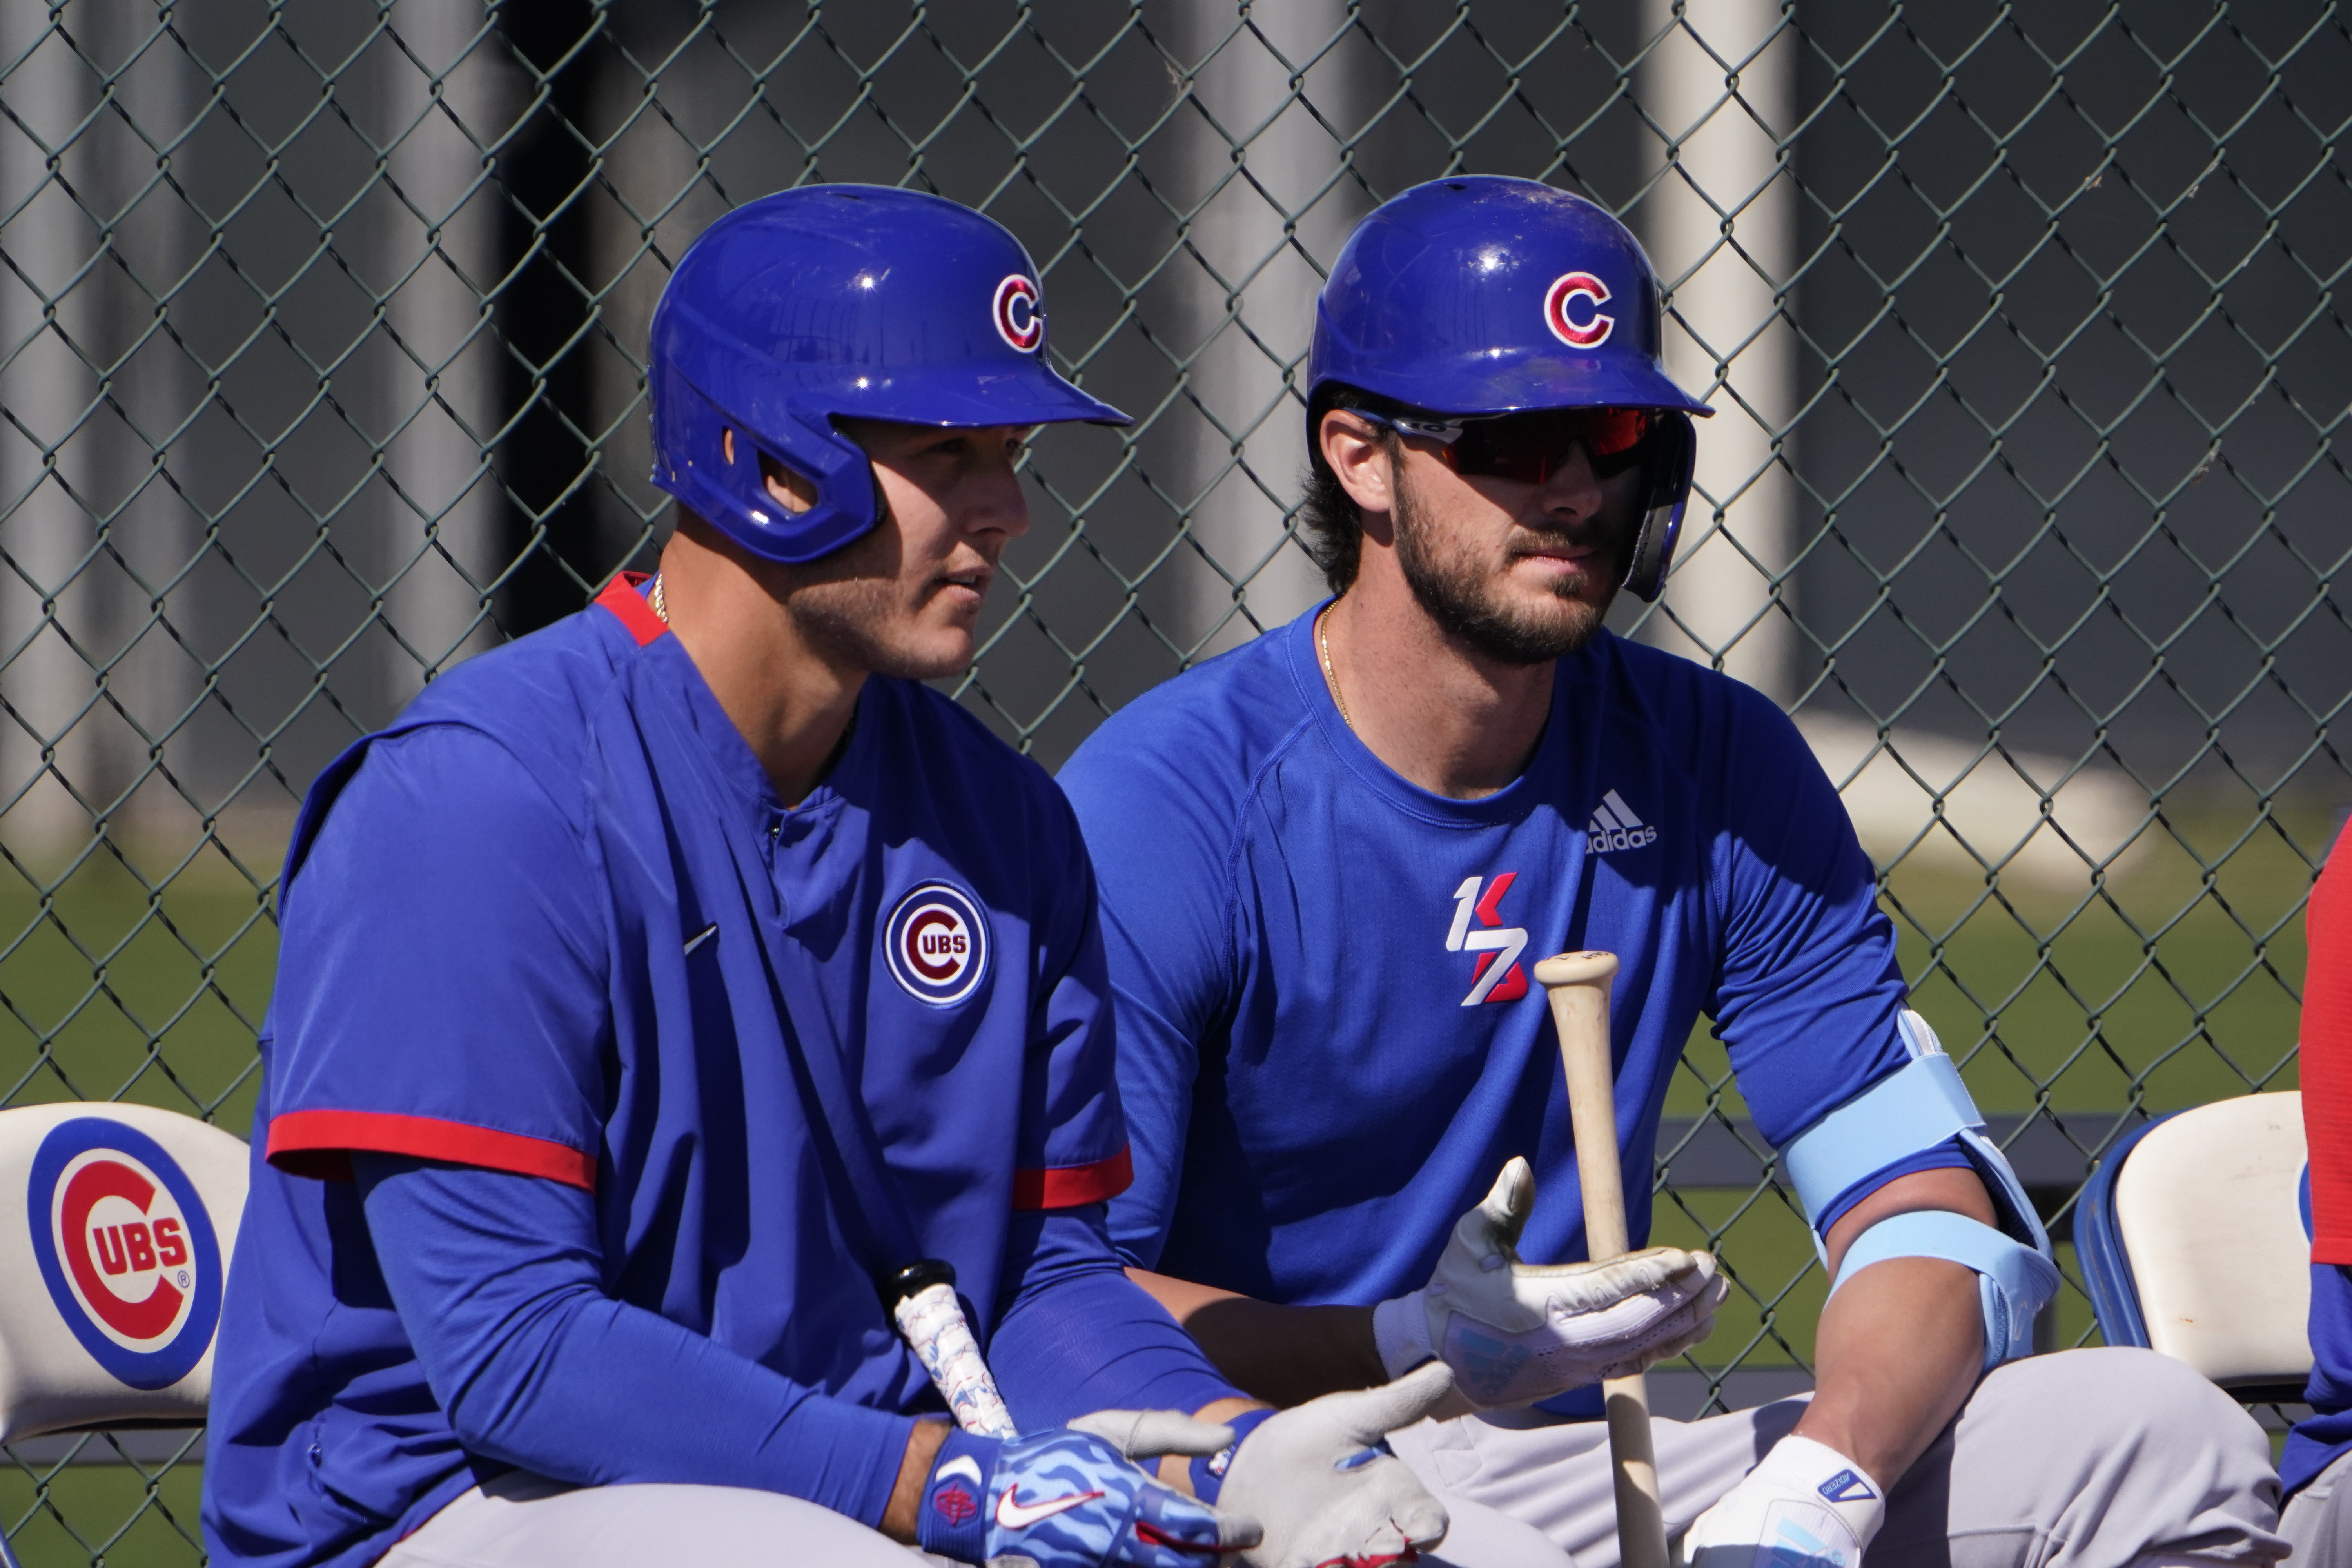 Here is what kind of uniforms the Cubs were wearing